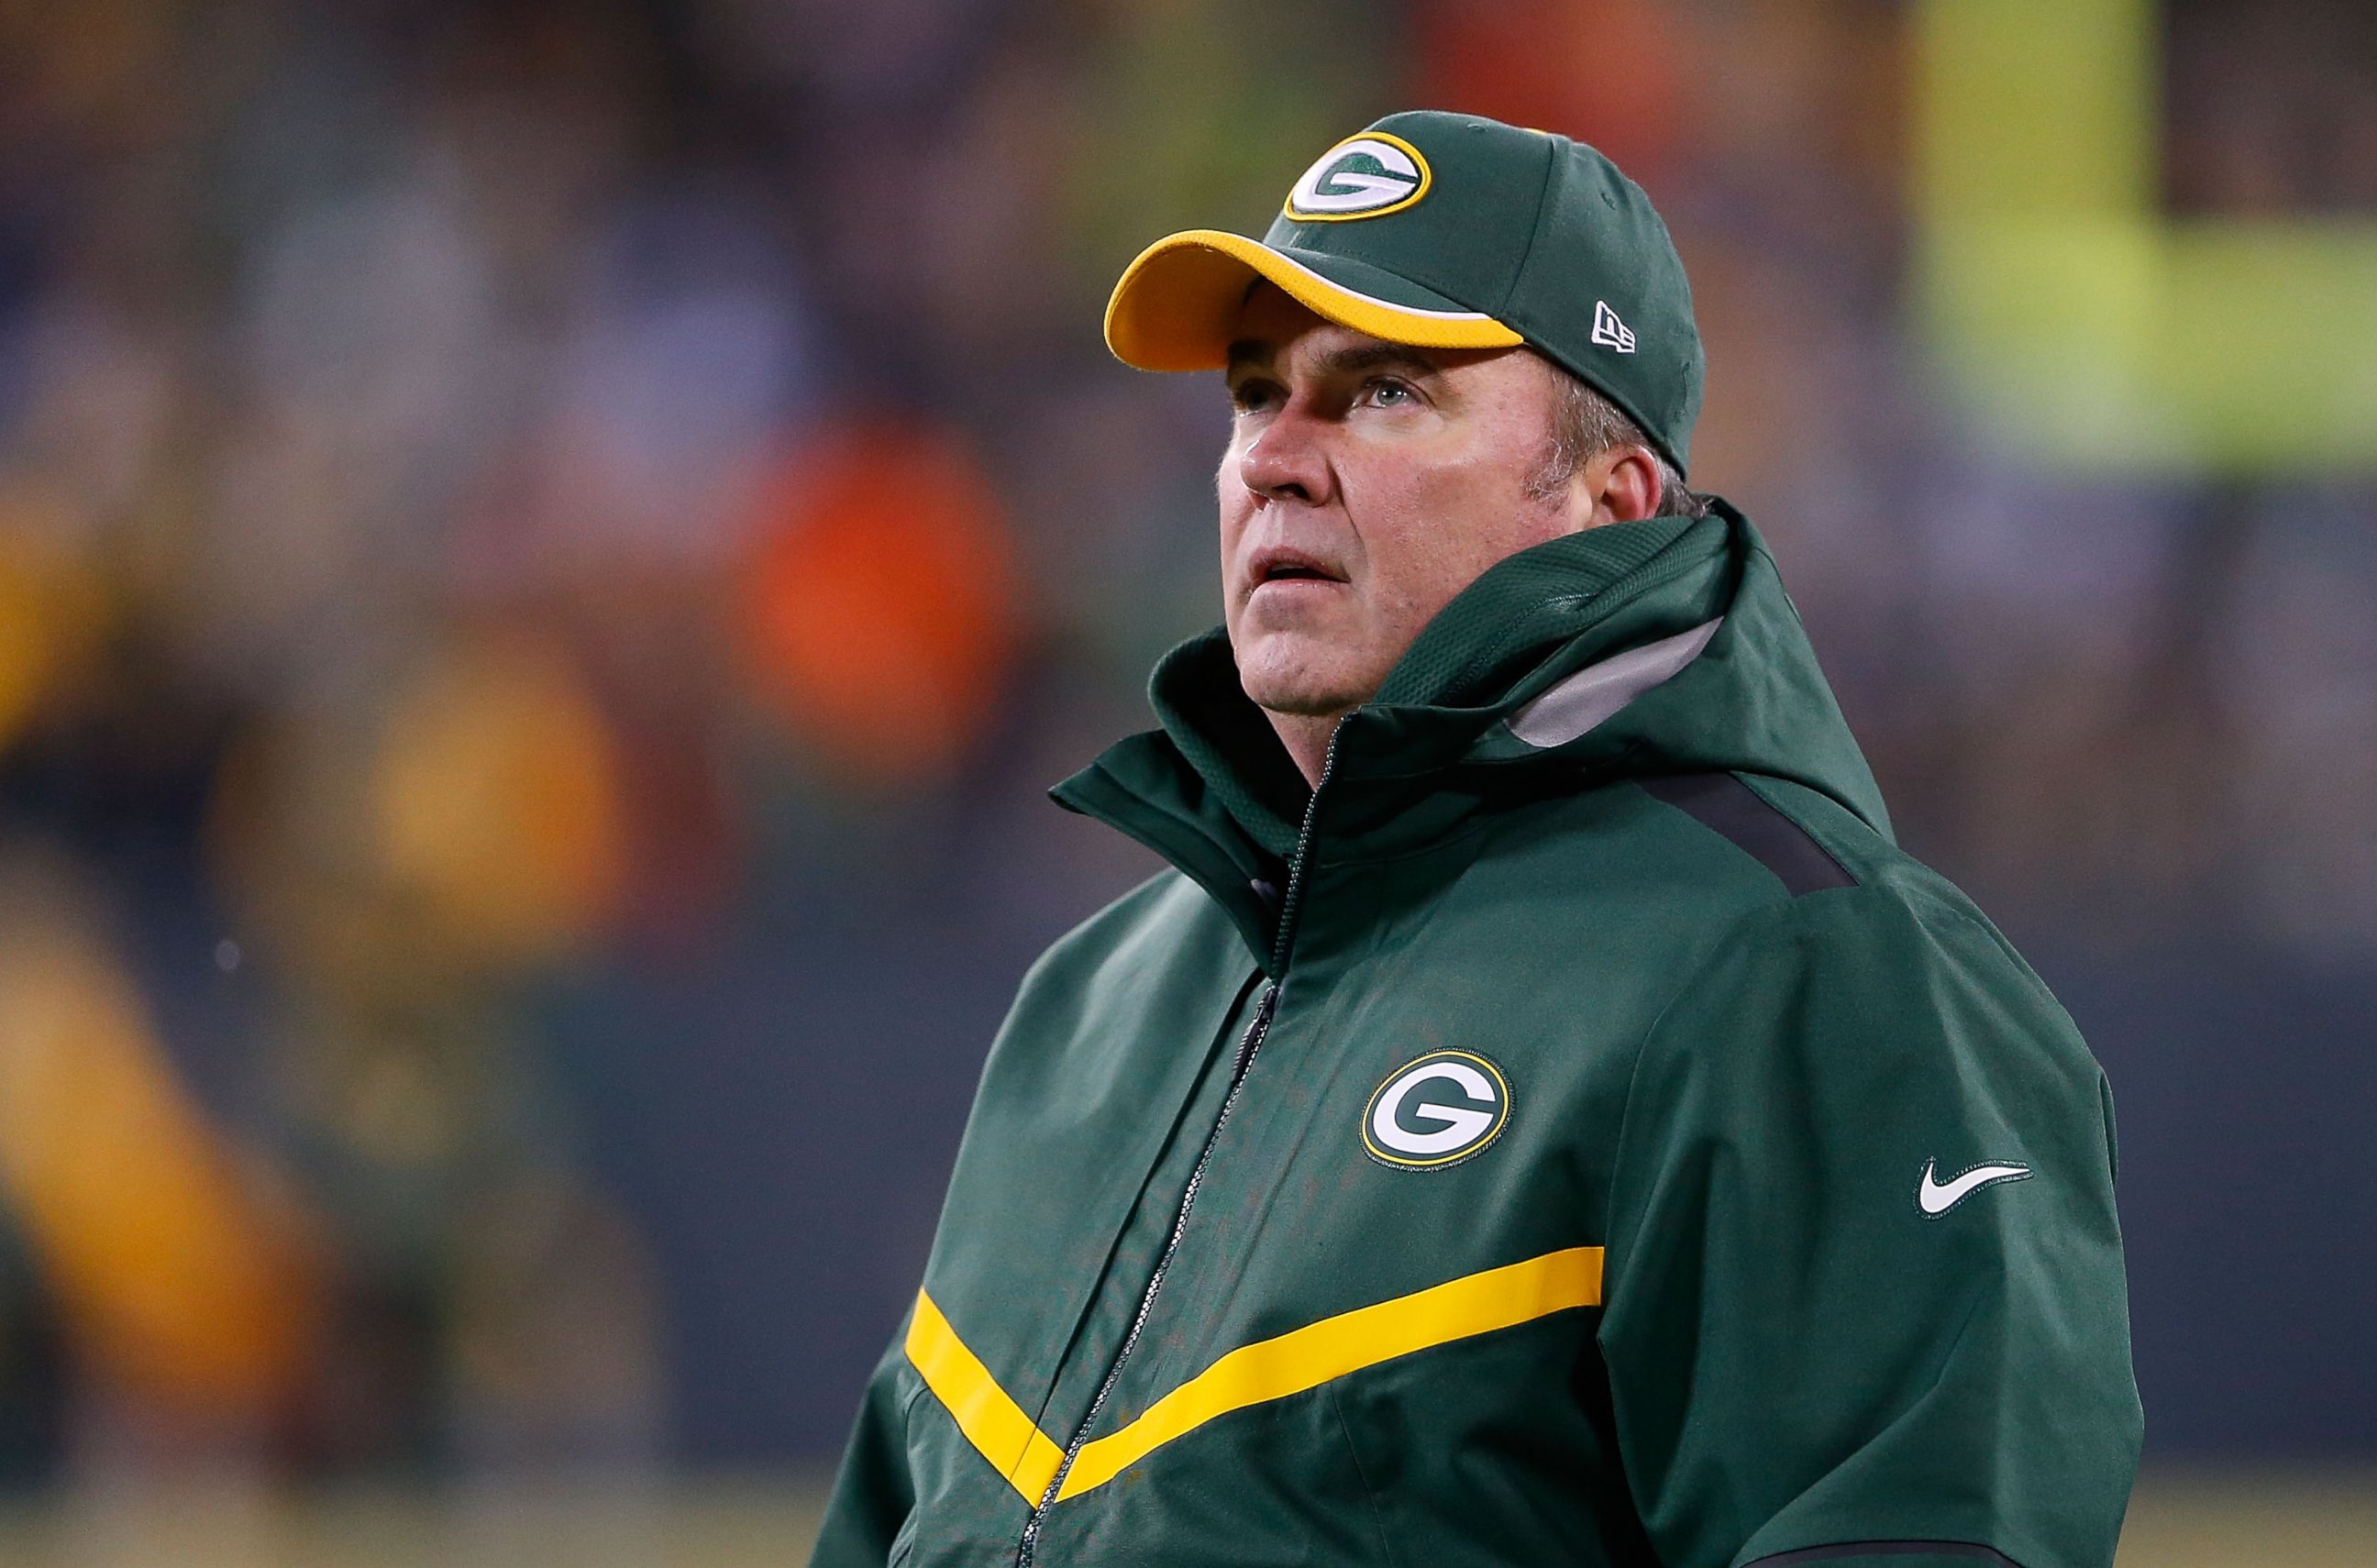 PHOTO: Green Bay Packers head coach Mike McCarthy during the game against the Detroit Lions on Dec. 28, 2014 in Green Bay, Wisconsin. 